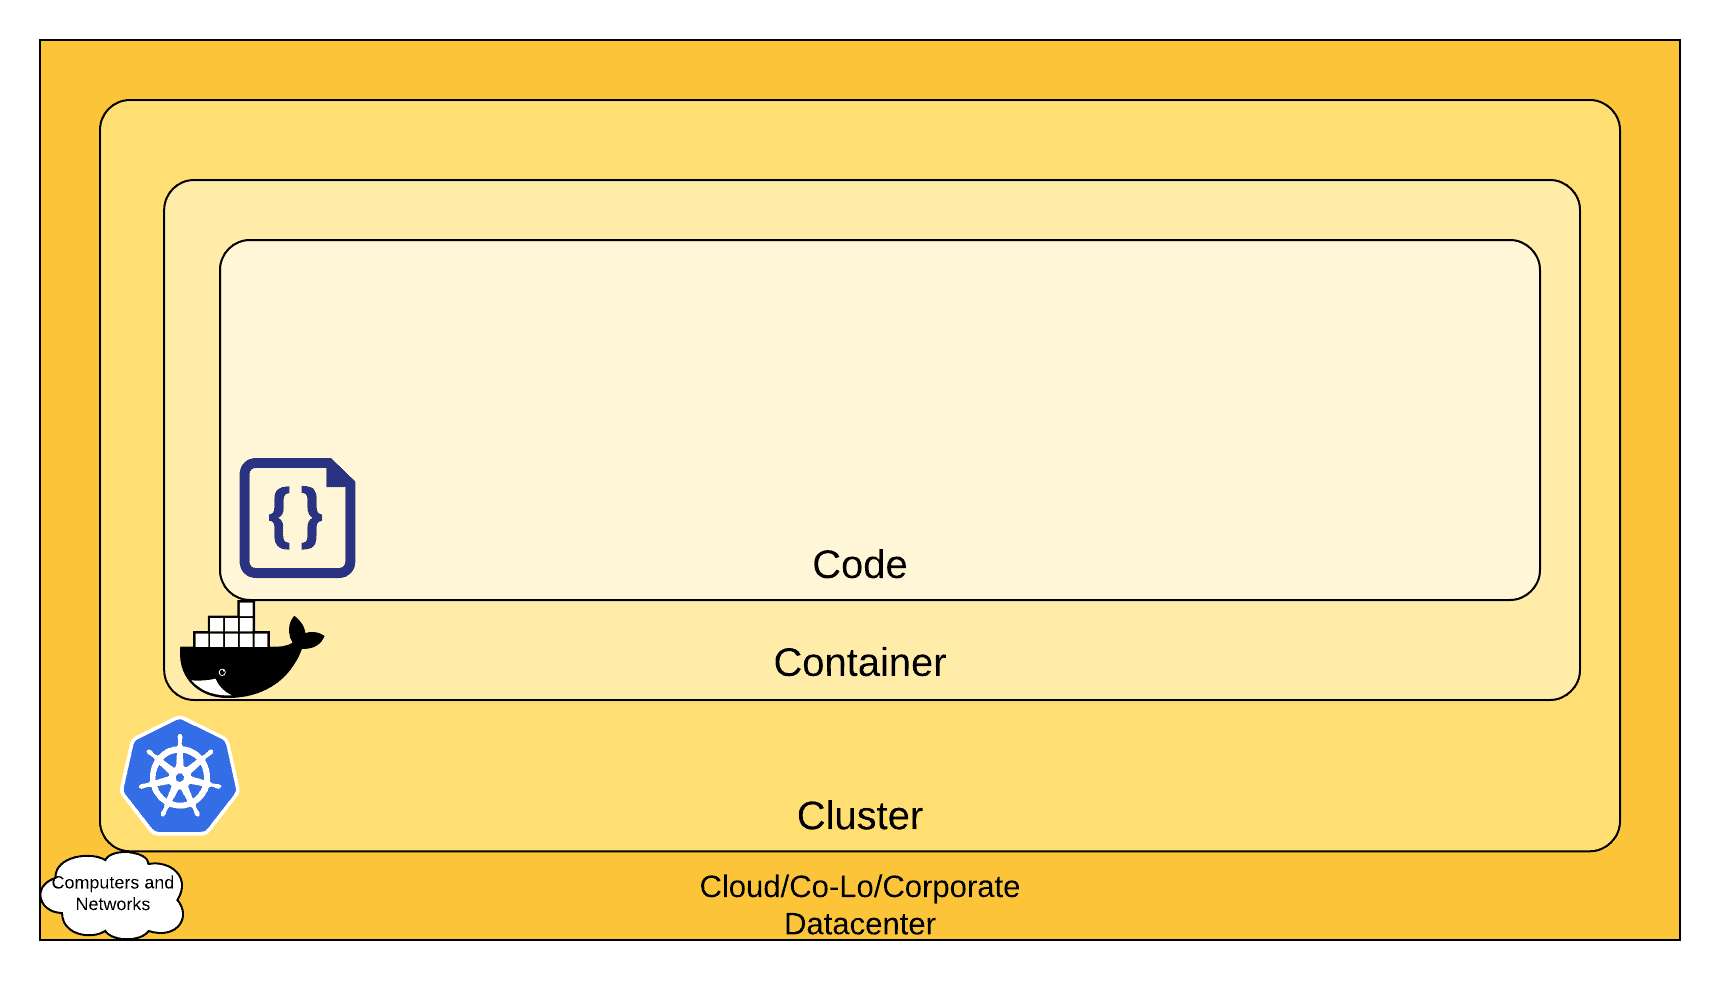 Image depicts a Kubernetes Security diagram of the 4C's of cloud native security: cloud, clusters, containers, and code.